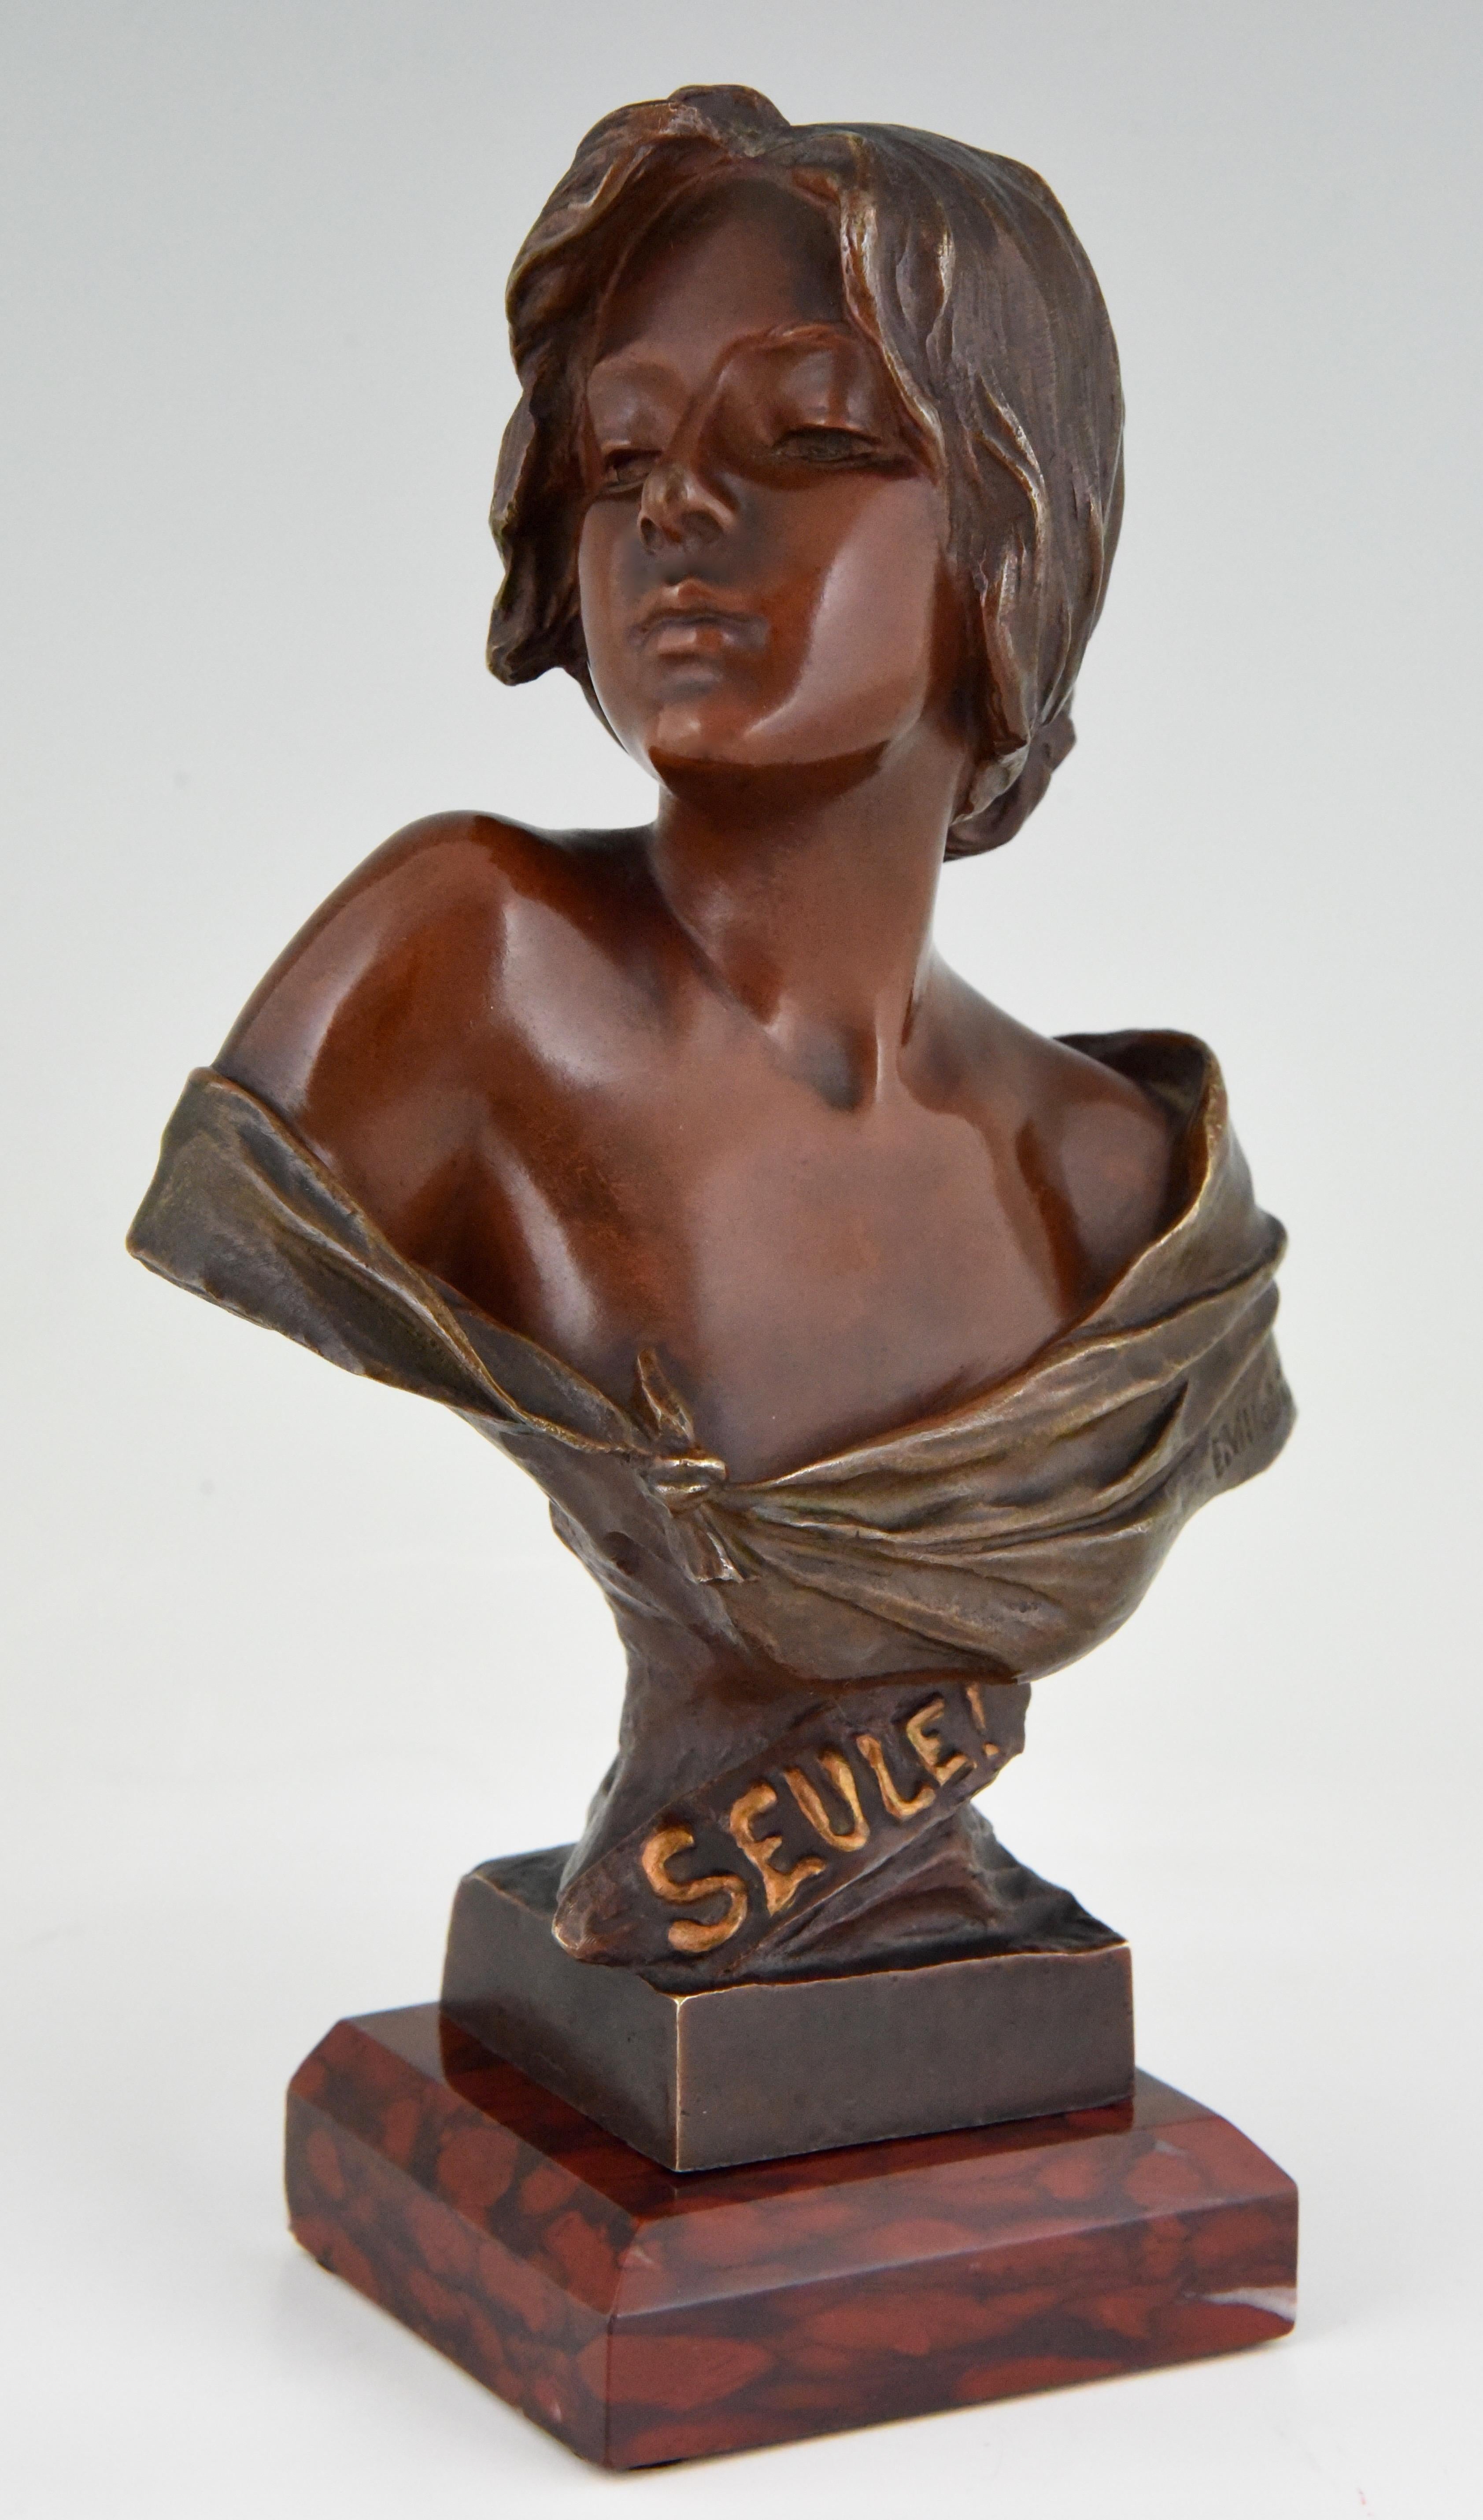 Beautiful Art Nouveau bronze bust of a woman titled Seule by the famous French sculptor Emmanuel Villanis, circa 1900. The bronze has a beautiful patina and stands on a red marble base. Signed and stamped with the Societé des Bronzes de Paris